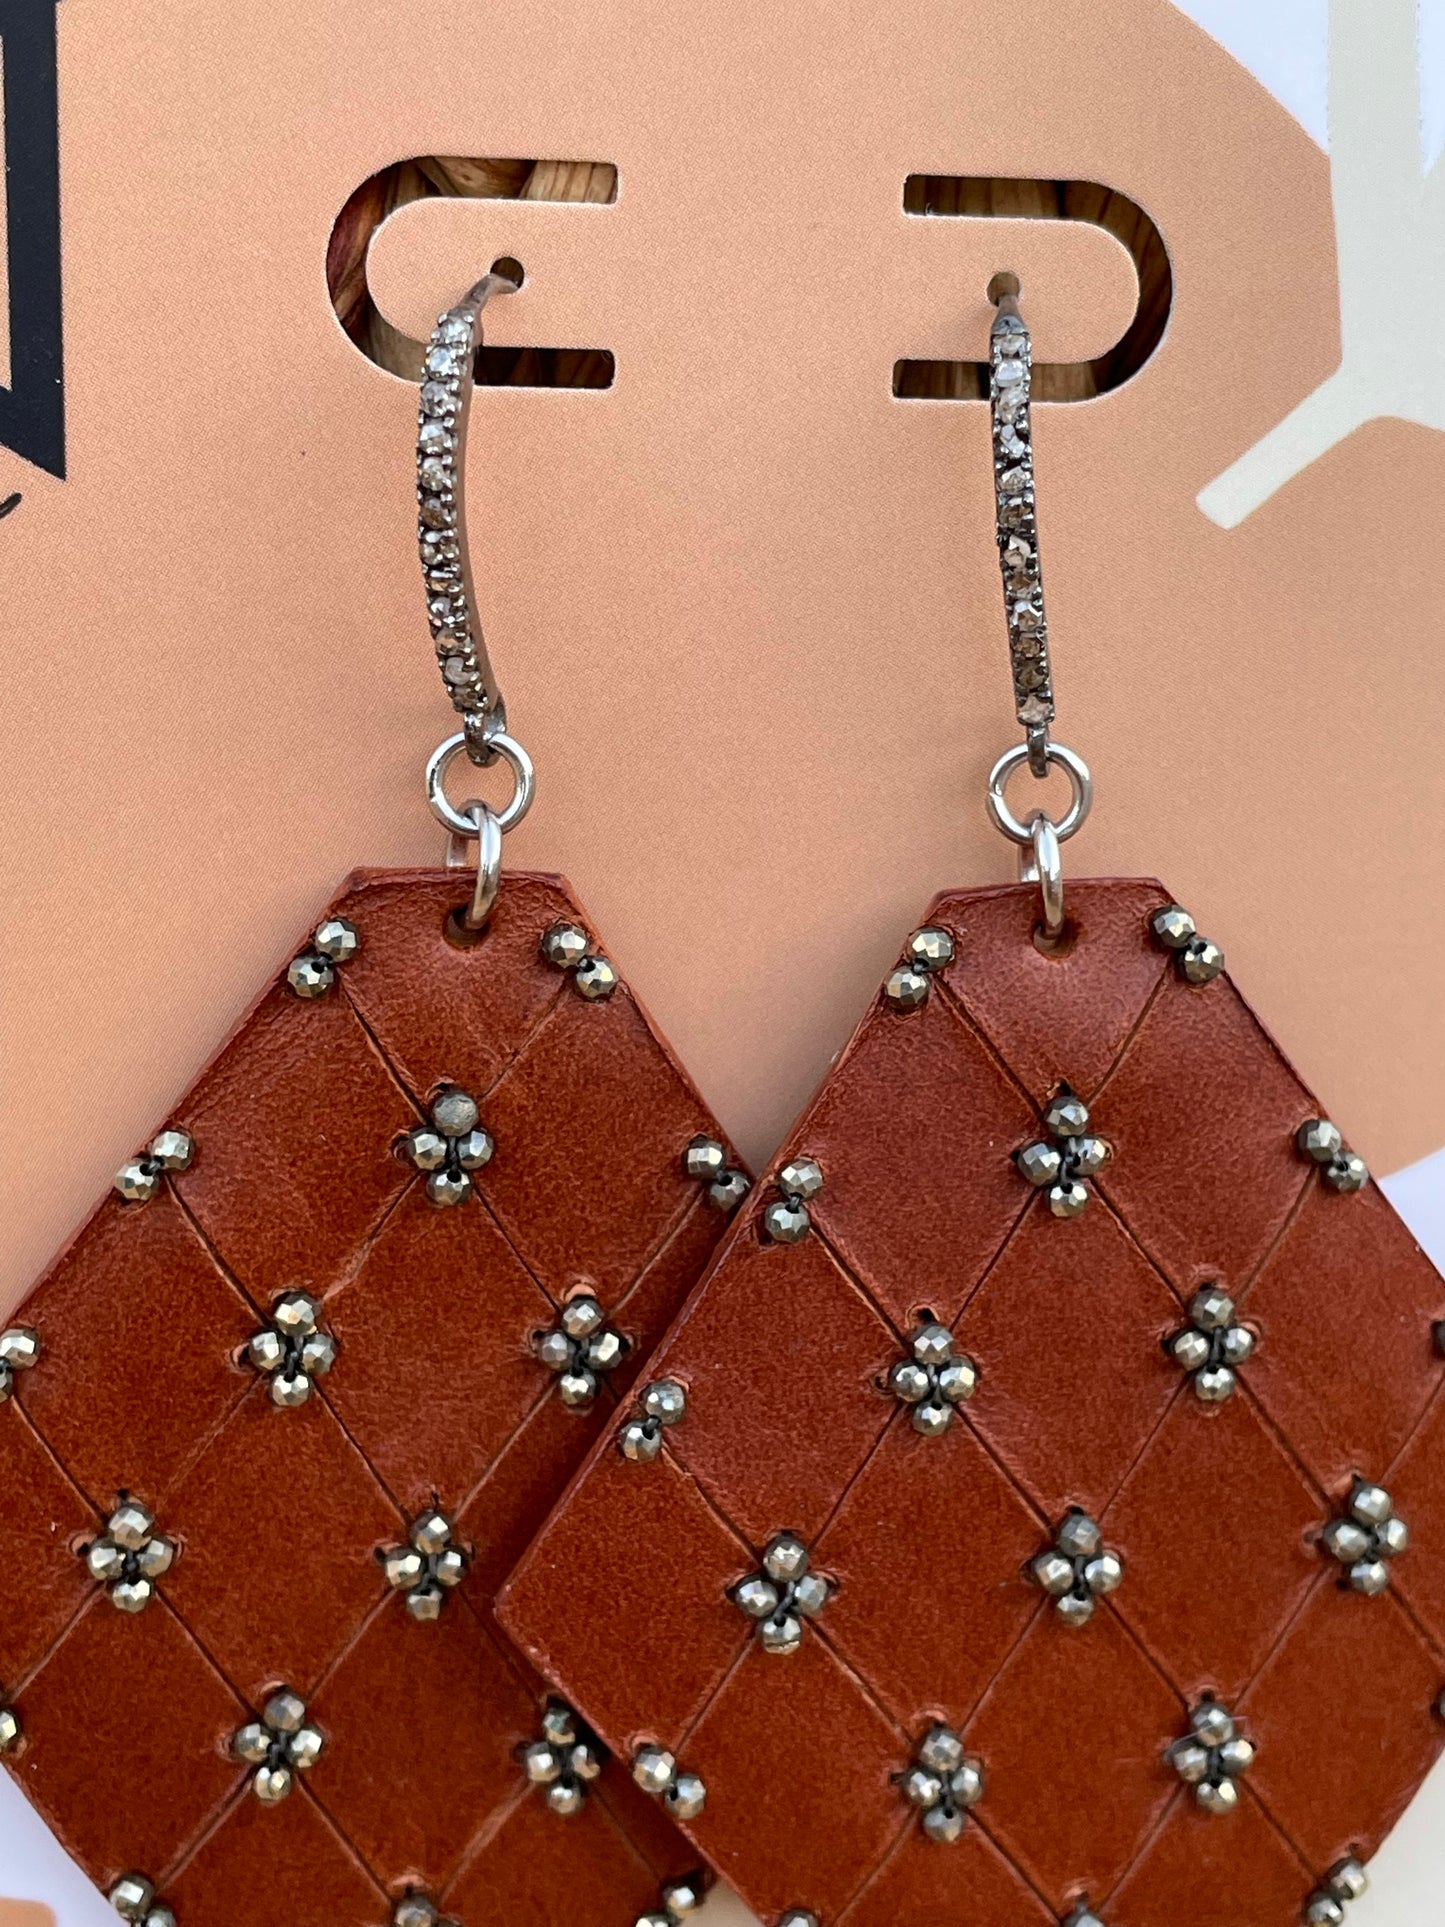 Large QUILTED leather earrings with genuine diamond ear hooks